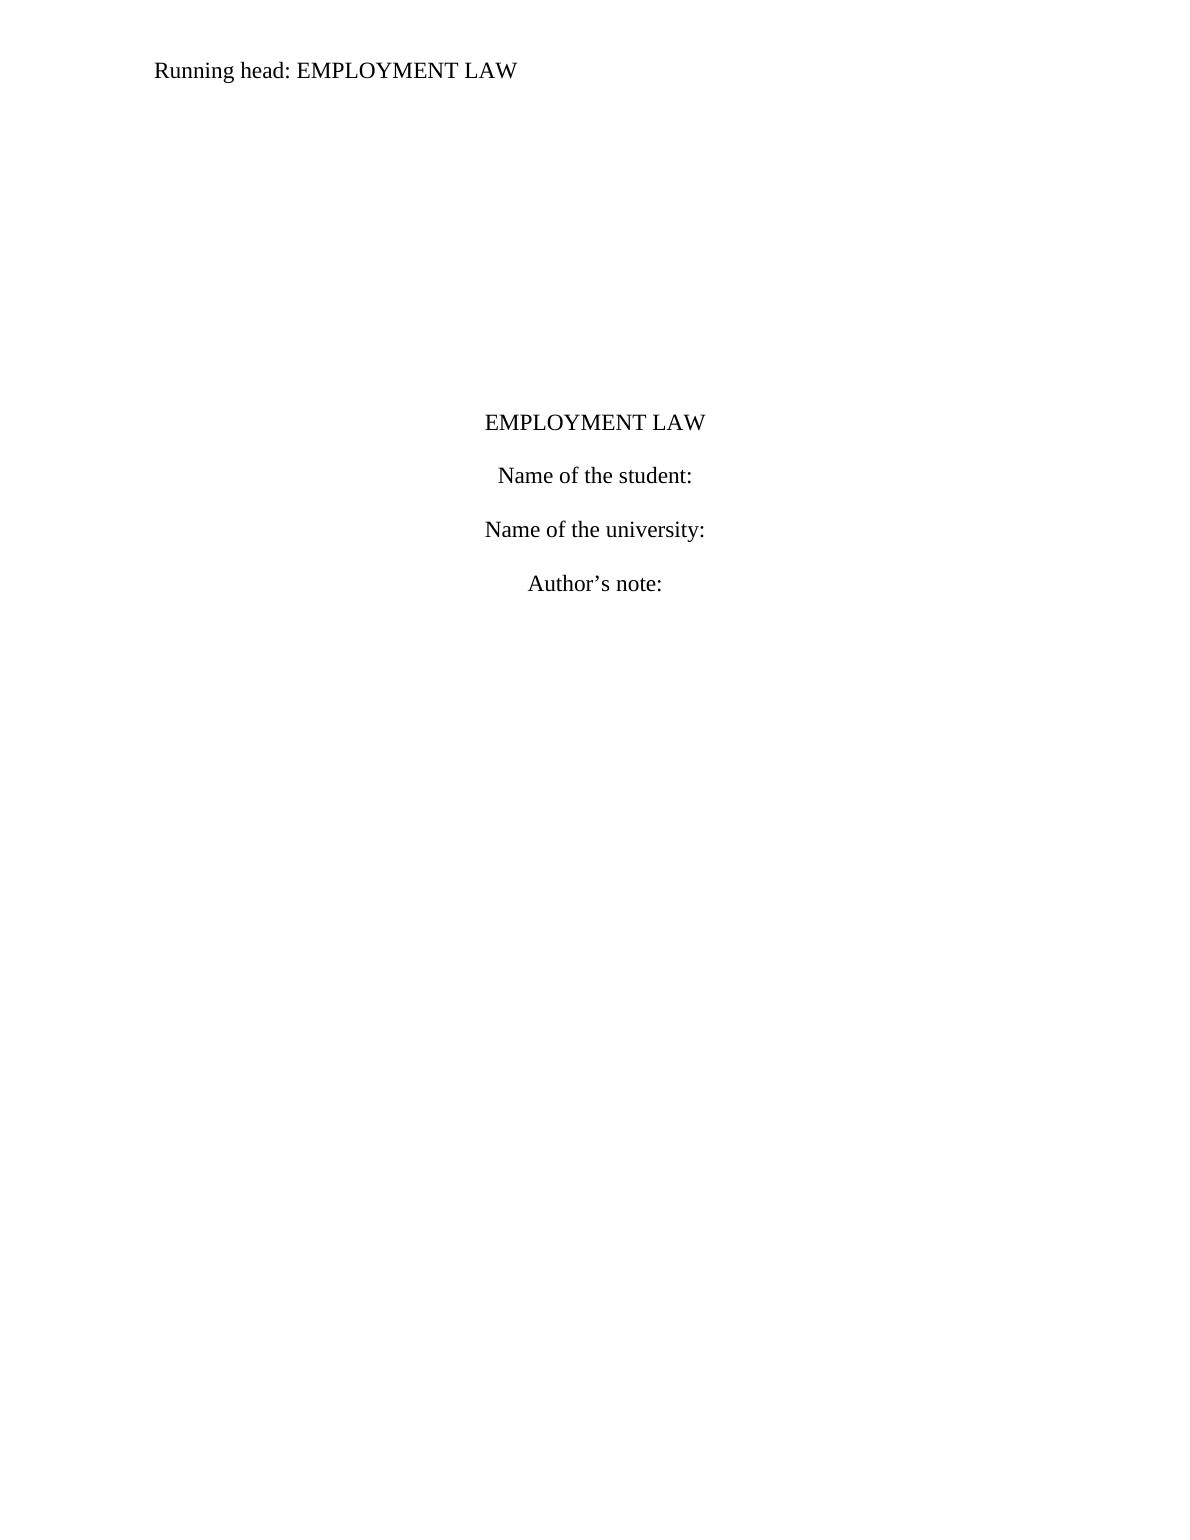 Assignment - Employment Law_1